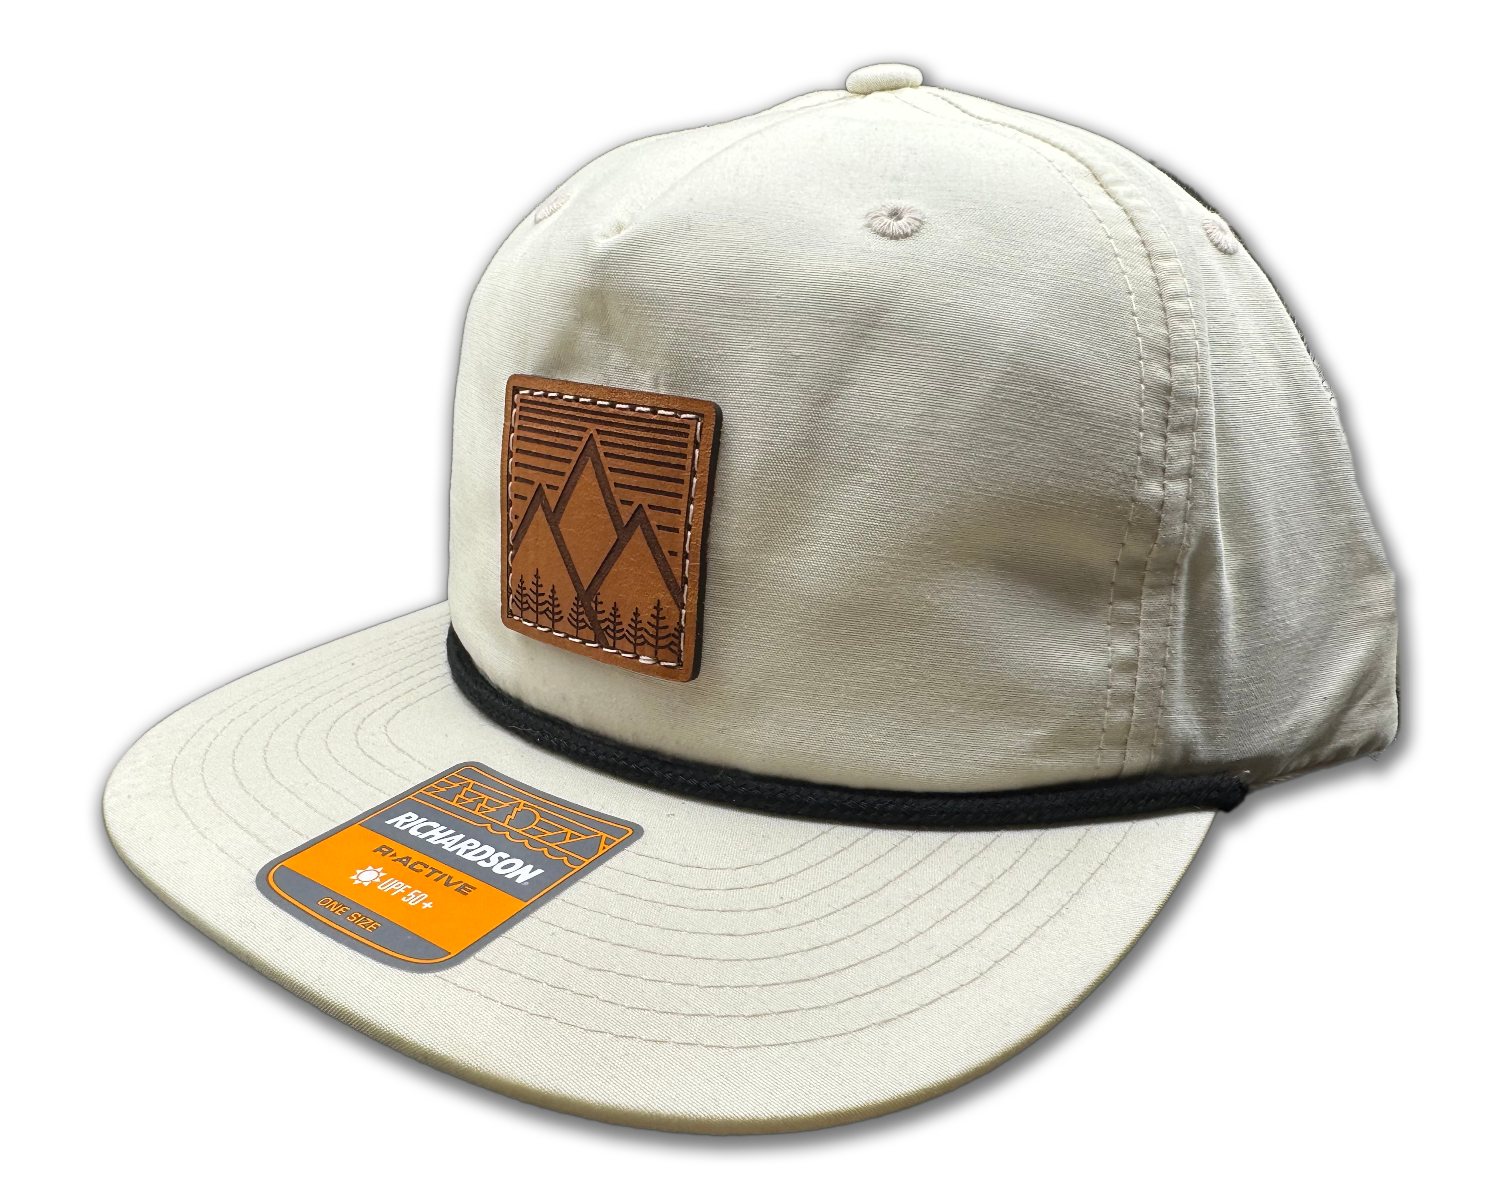 Stay cool and stylish with the Birch Richardson 256 Rope Umpqua Hat. Featuring a flatbill and lightweight material, this low profile SnapBack cap is perfect for any outdoor adventure. The real leather patch with our mountain west design adds a touch of rugged charm to this must-have accessory.